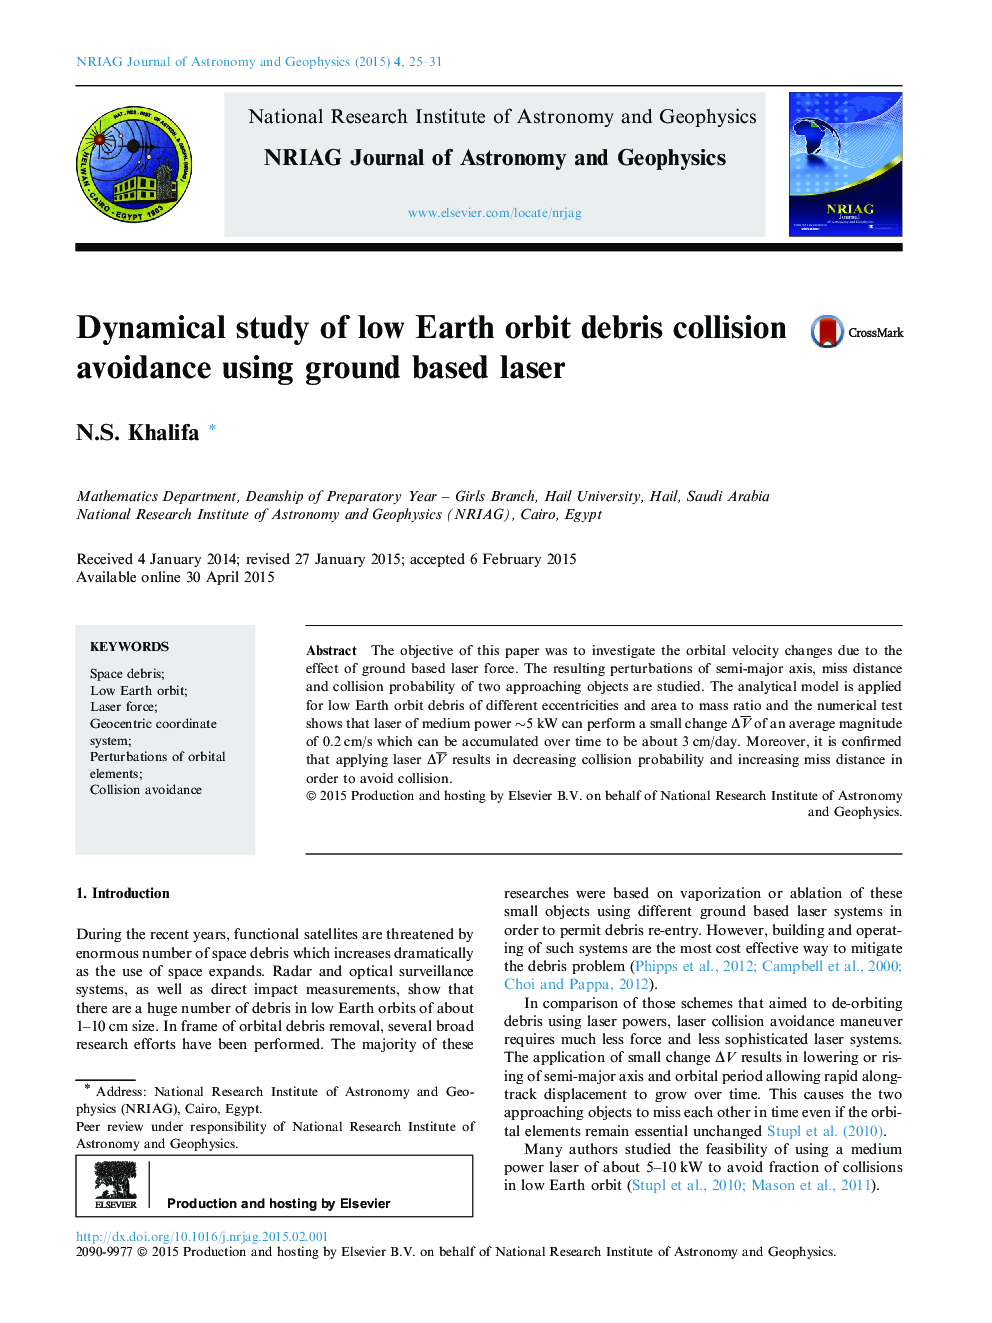 Dynamical study of low Earth orbit debris collision avoidance using ground based laser 